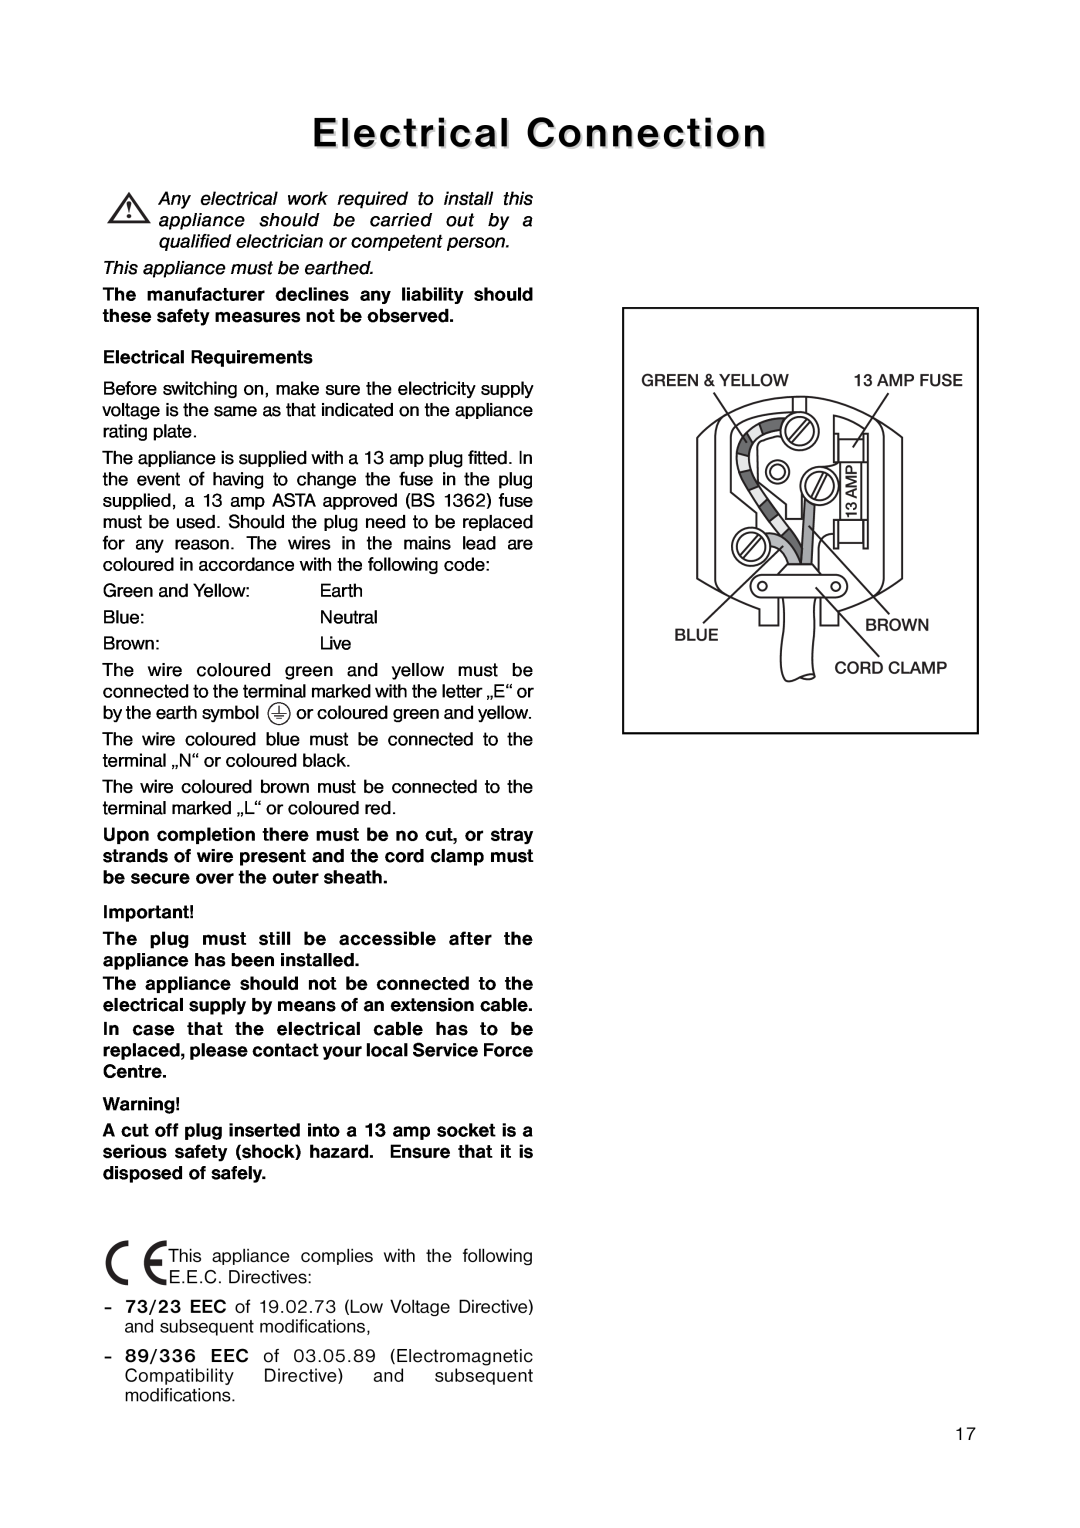 Zanussi ZERT 6546 manual Electrical Connection, This appliance must be earthed 